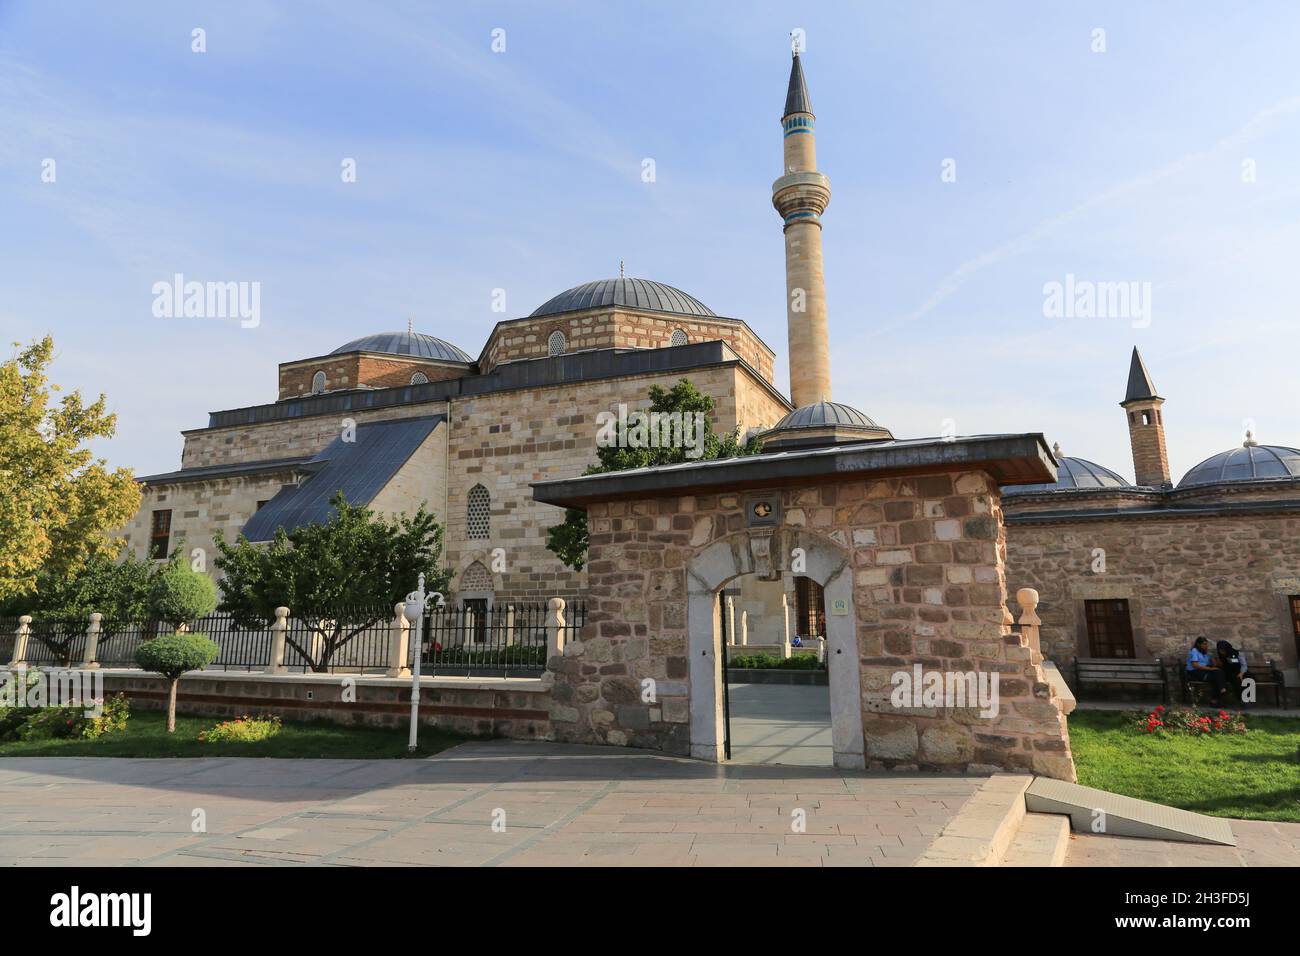 The Mevlana Museum is located in Karatay, Konya, Turkey and exhibits dervish artifacts, manuscripts, tablets et cetera. Stock Photo